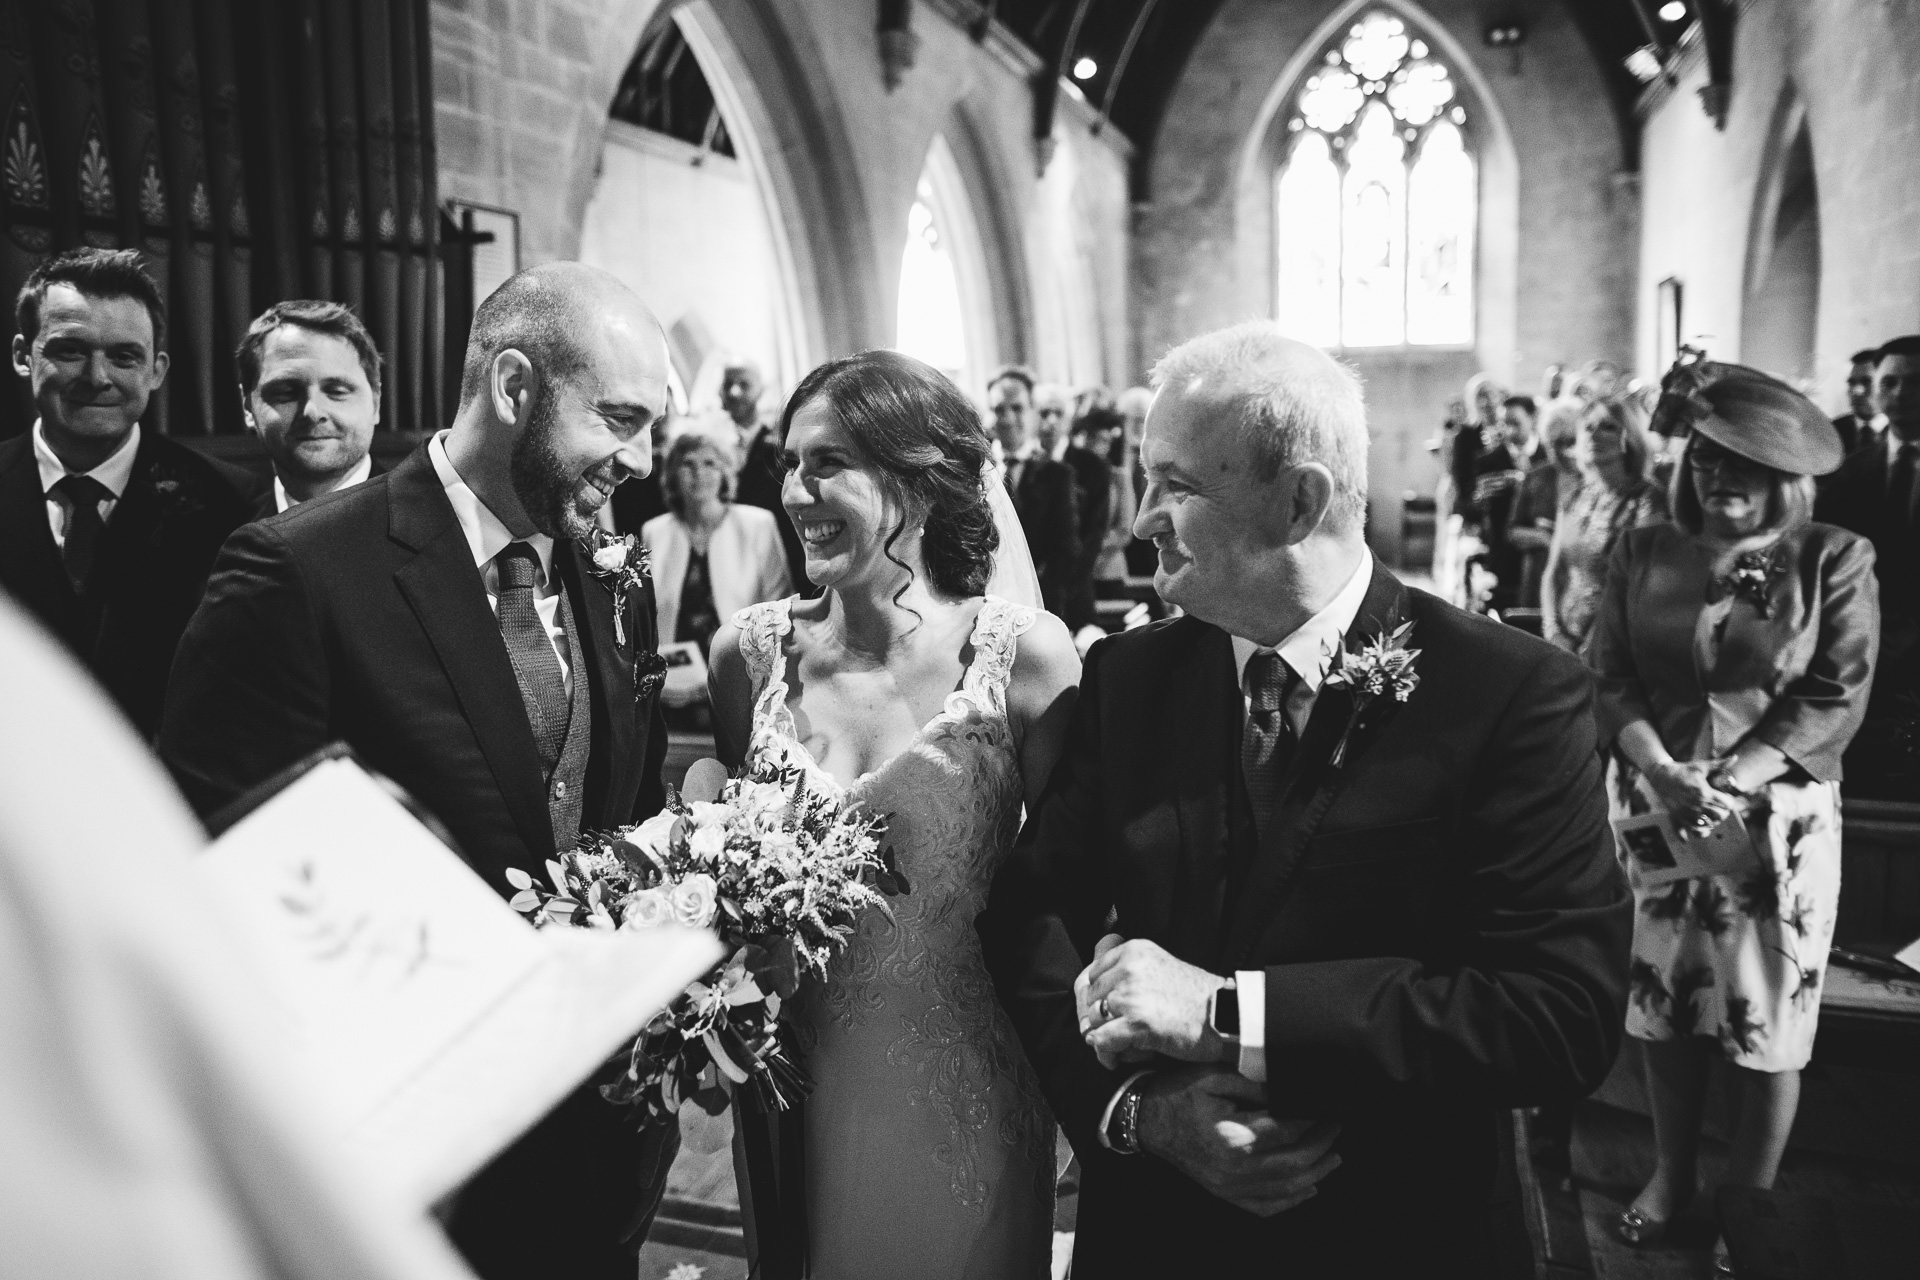 Bride and groom smiling at each other in church